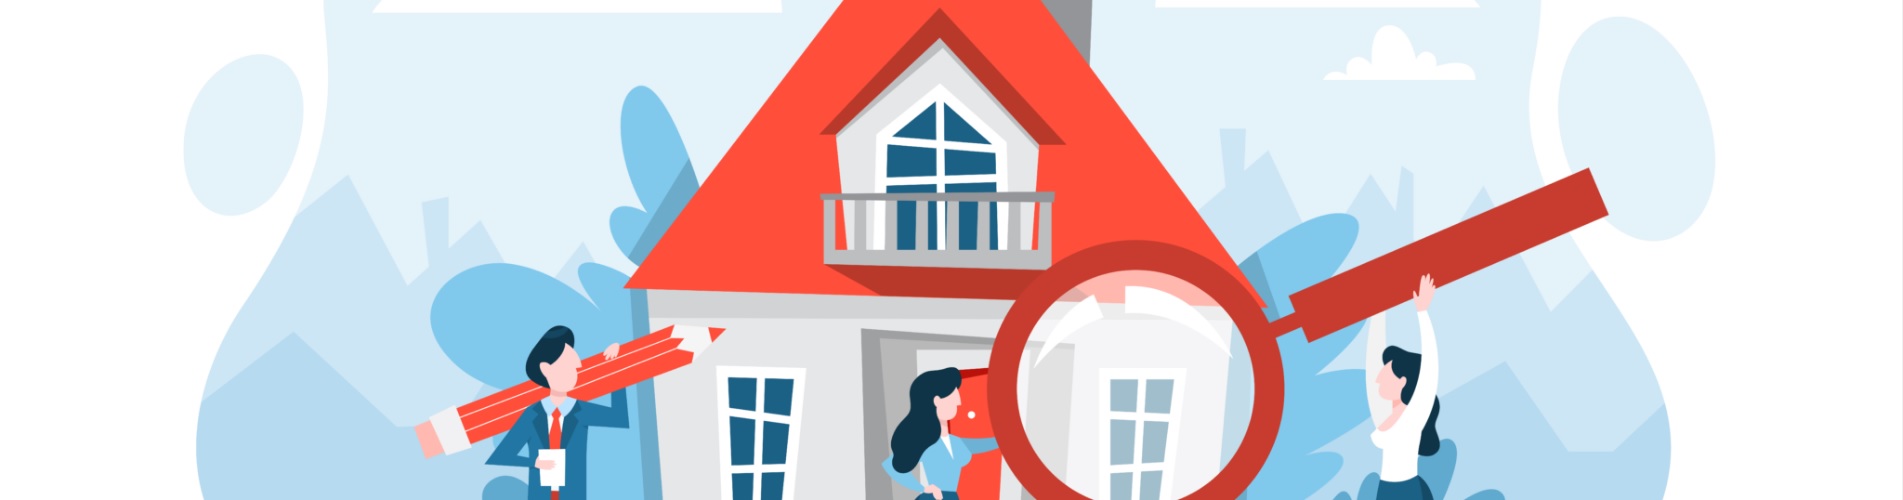 RENTAL PROPERTY INSPECTIONS AND YOUR PRIVACY